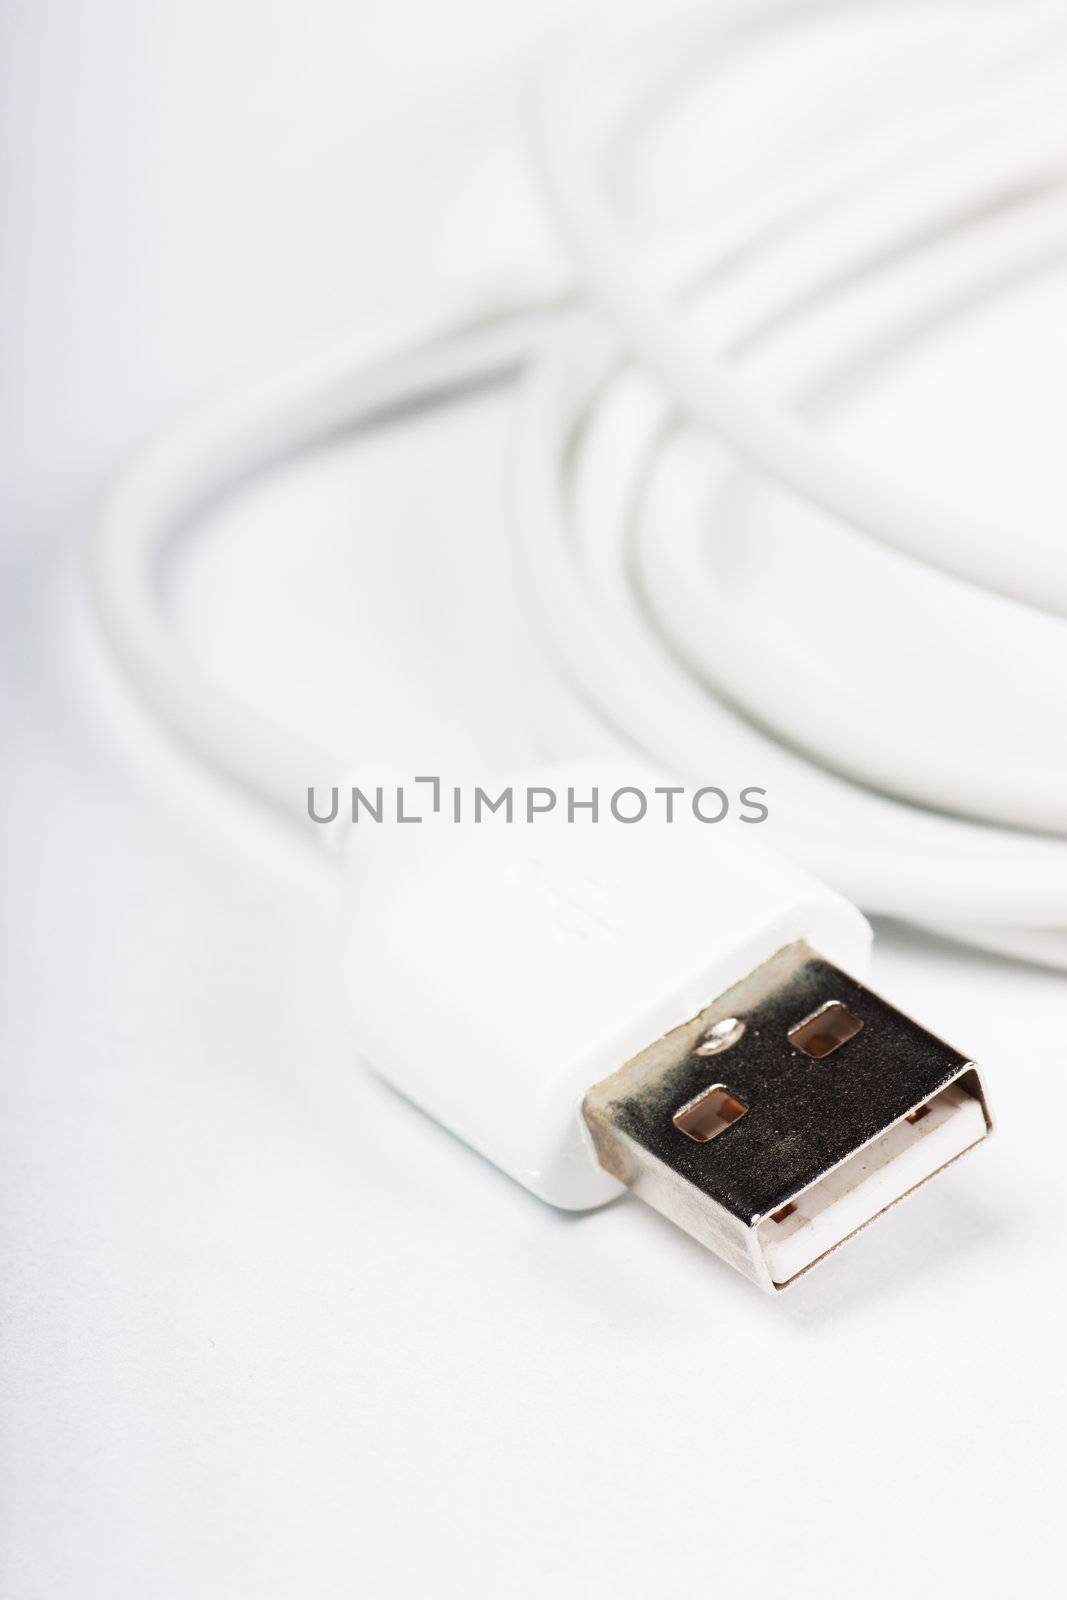 USB cable by AGorohov